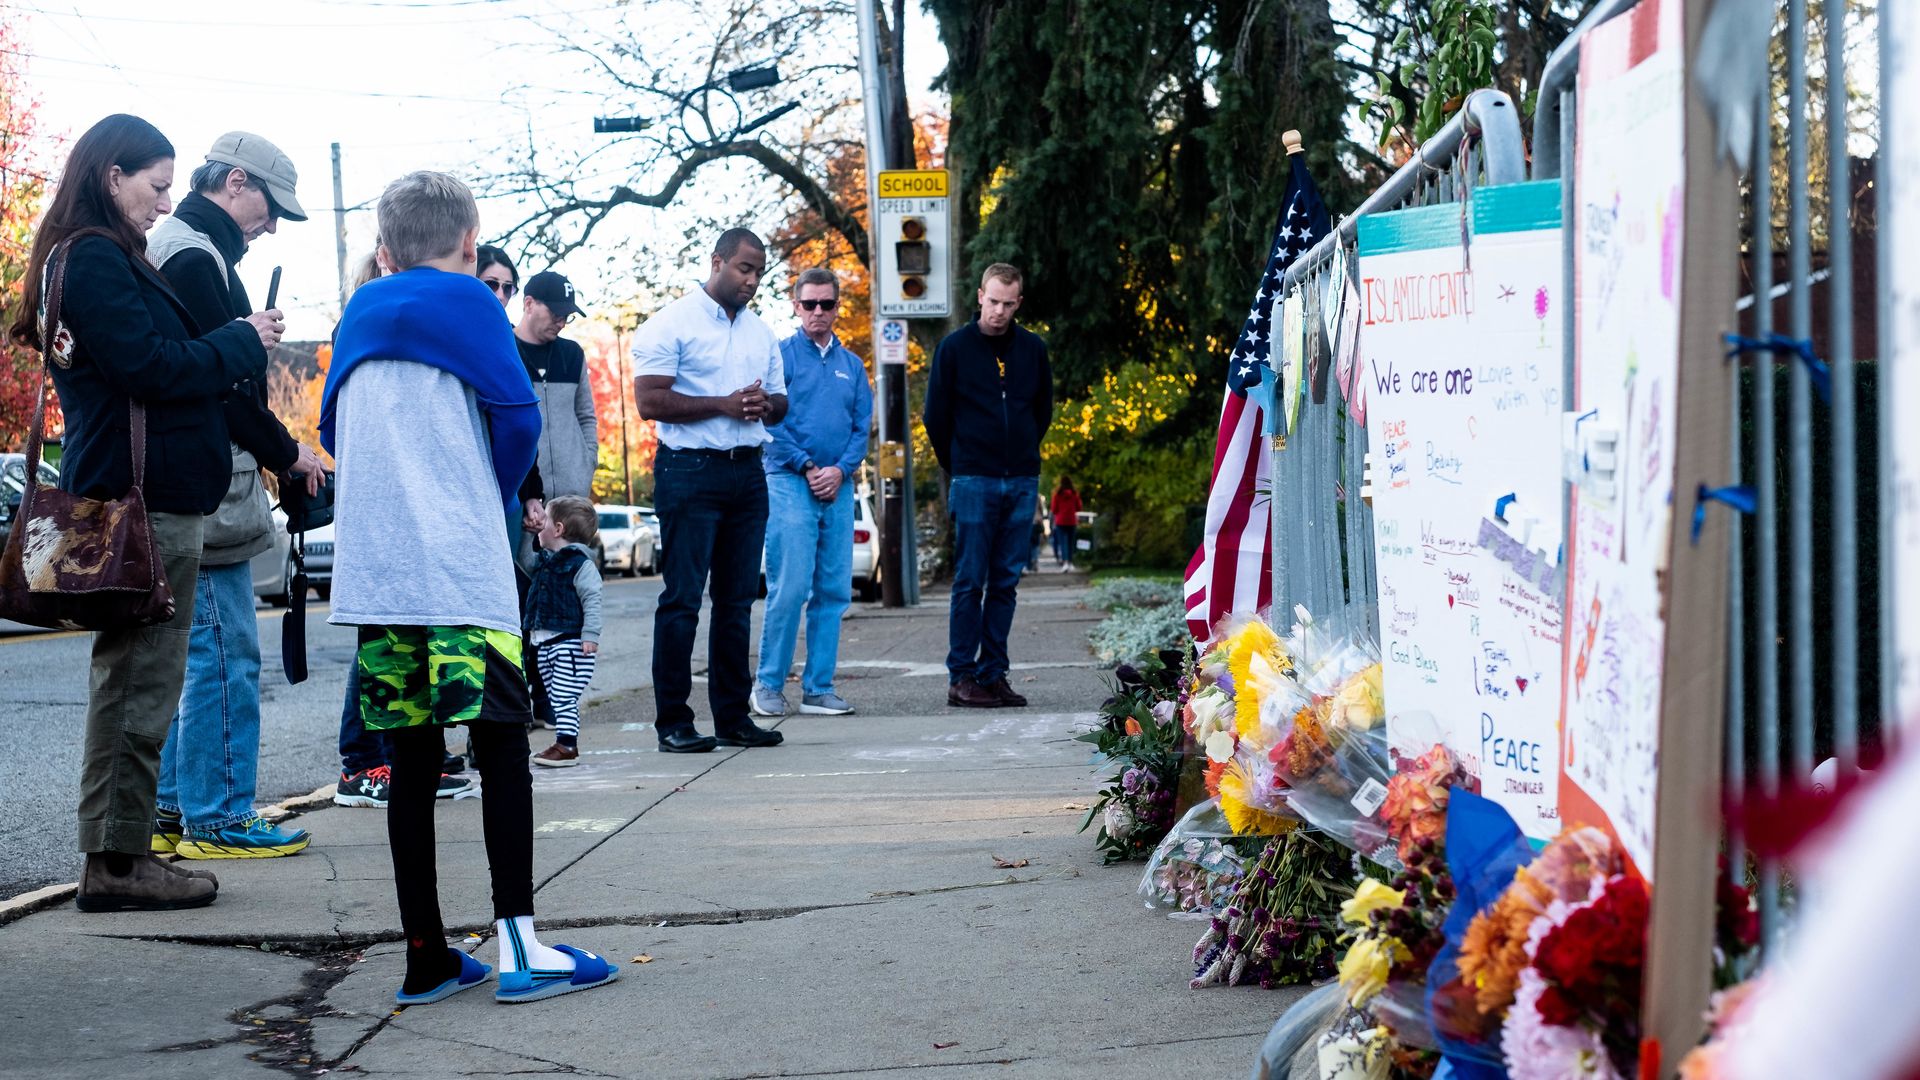 Flowers seen at the memorial. One year after the shooting at the Tree of Life synagogue in Squirrel Hill, Pittsburgh, PA, many come back to the synagogue to pay their respects.